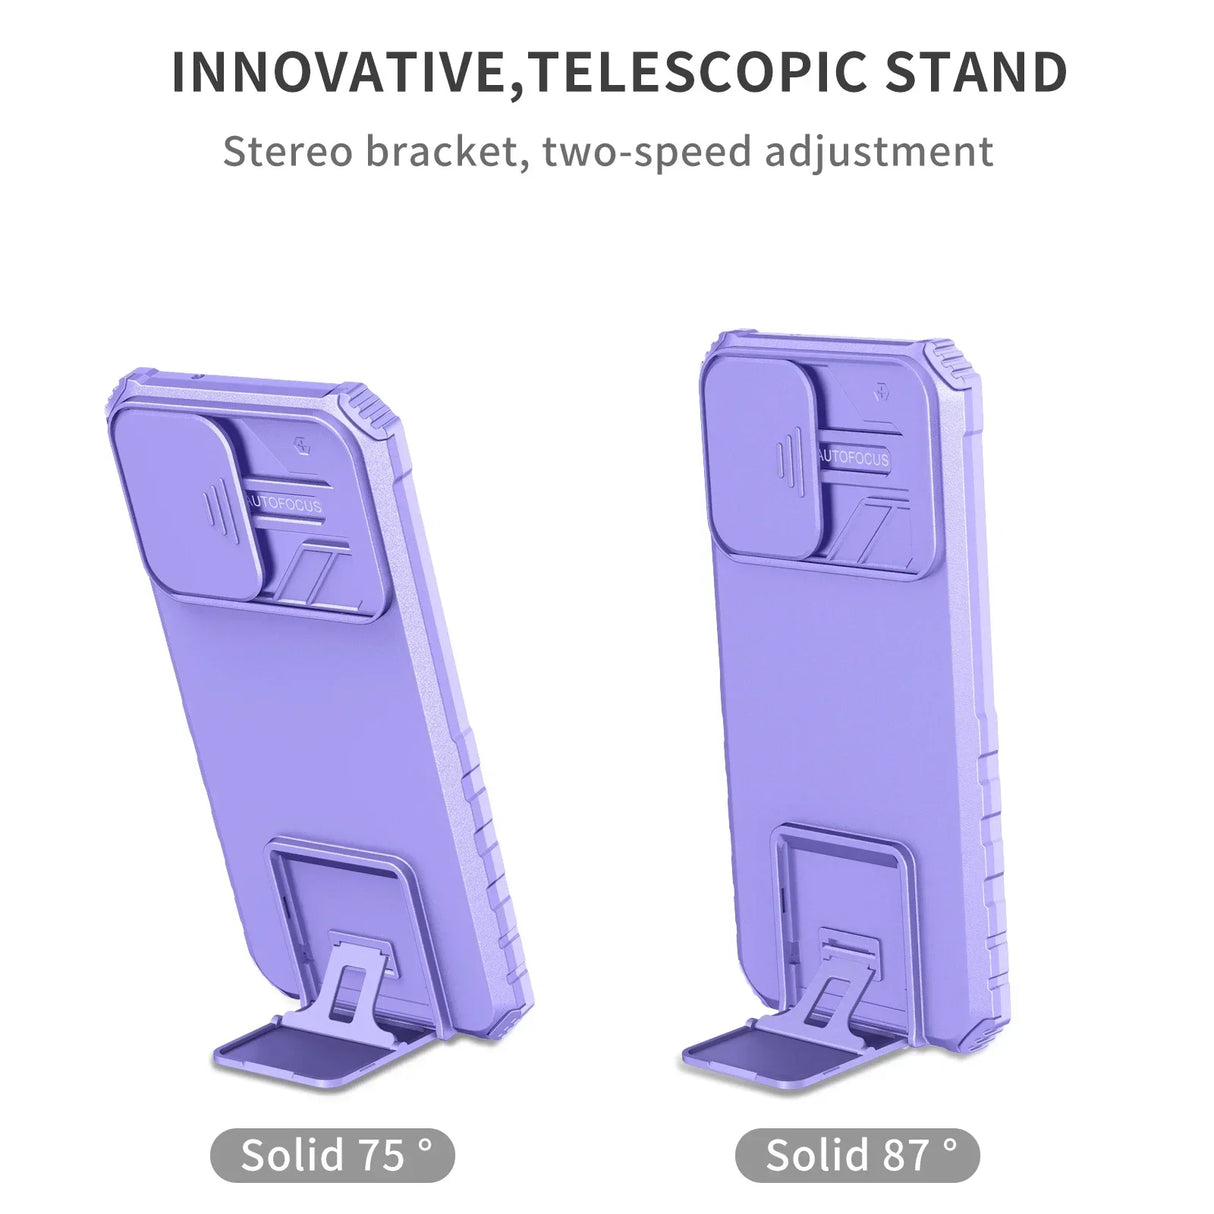 the innovate tel stand is a great accessory for your phone